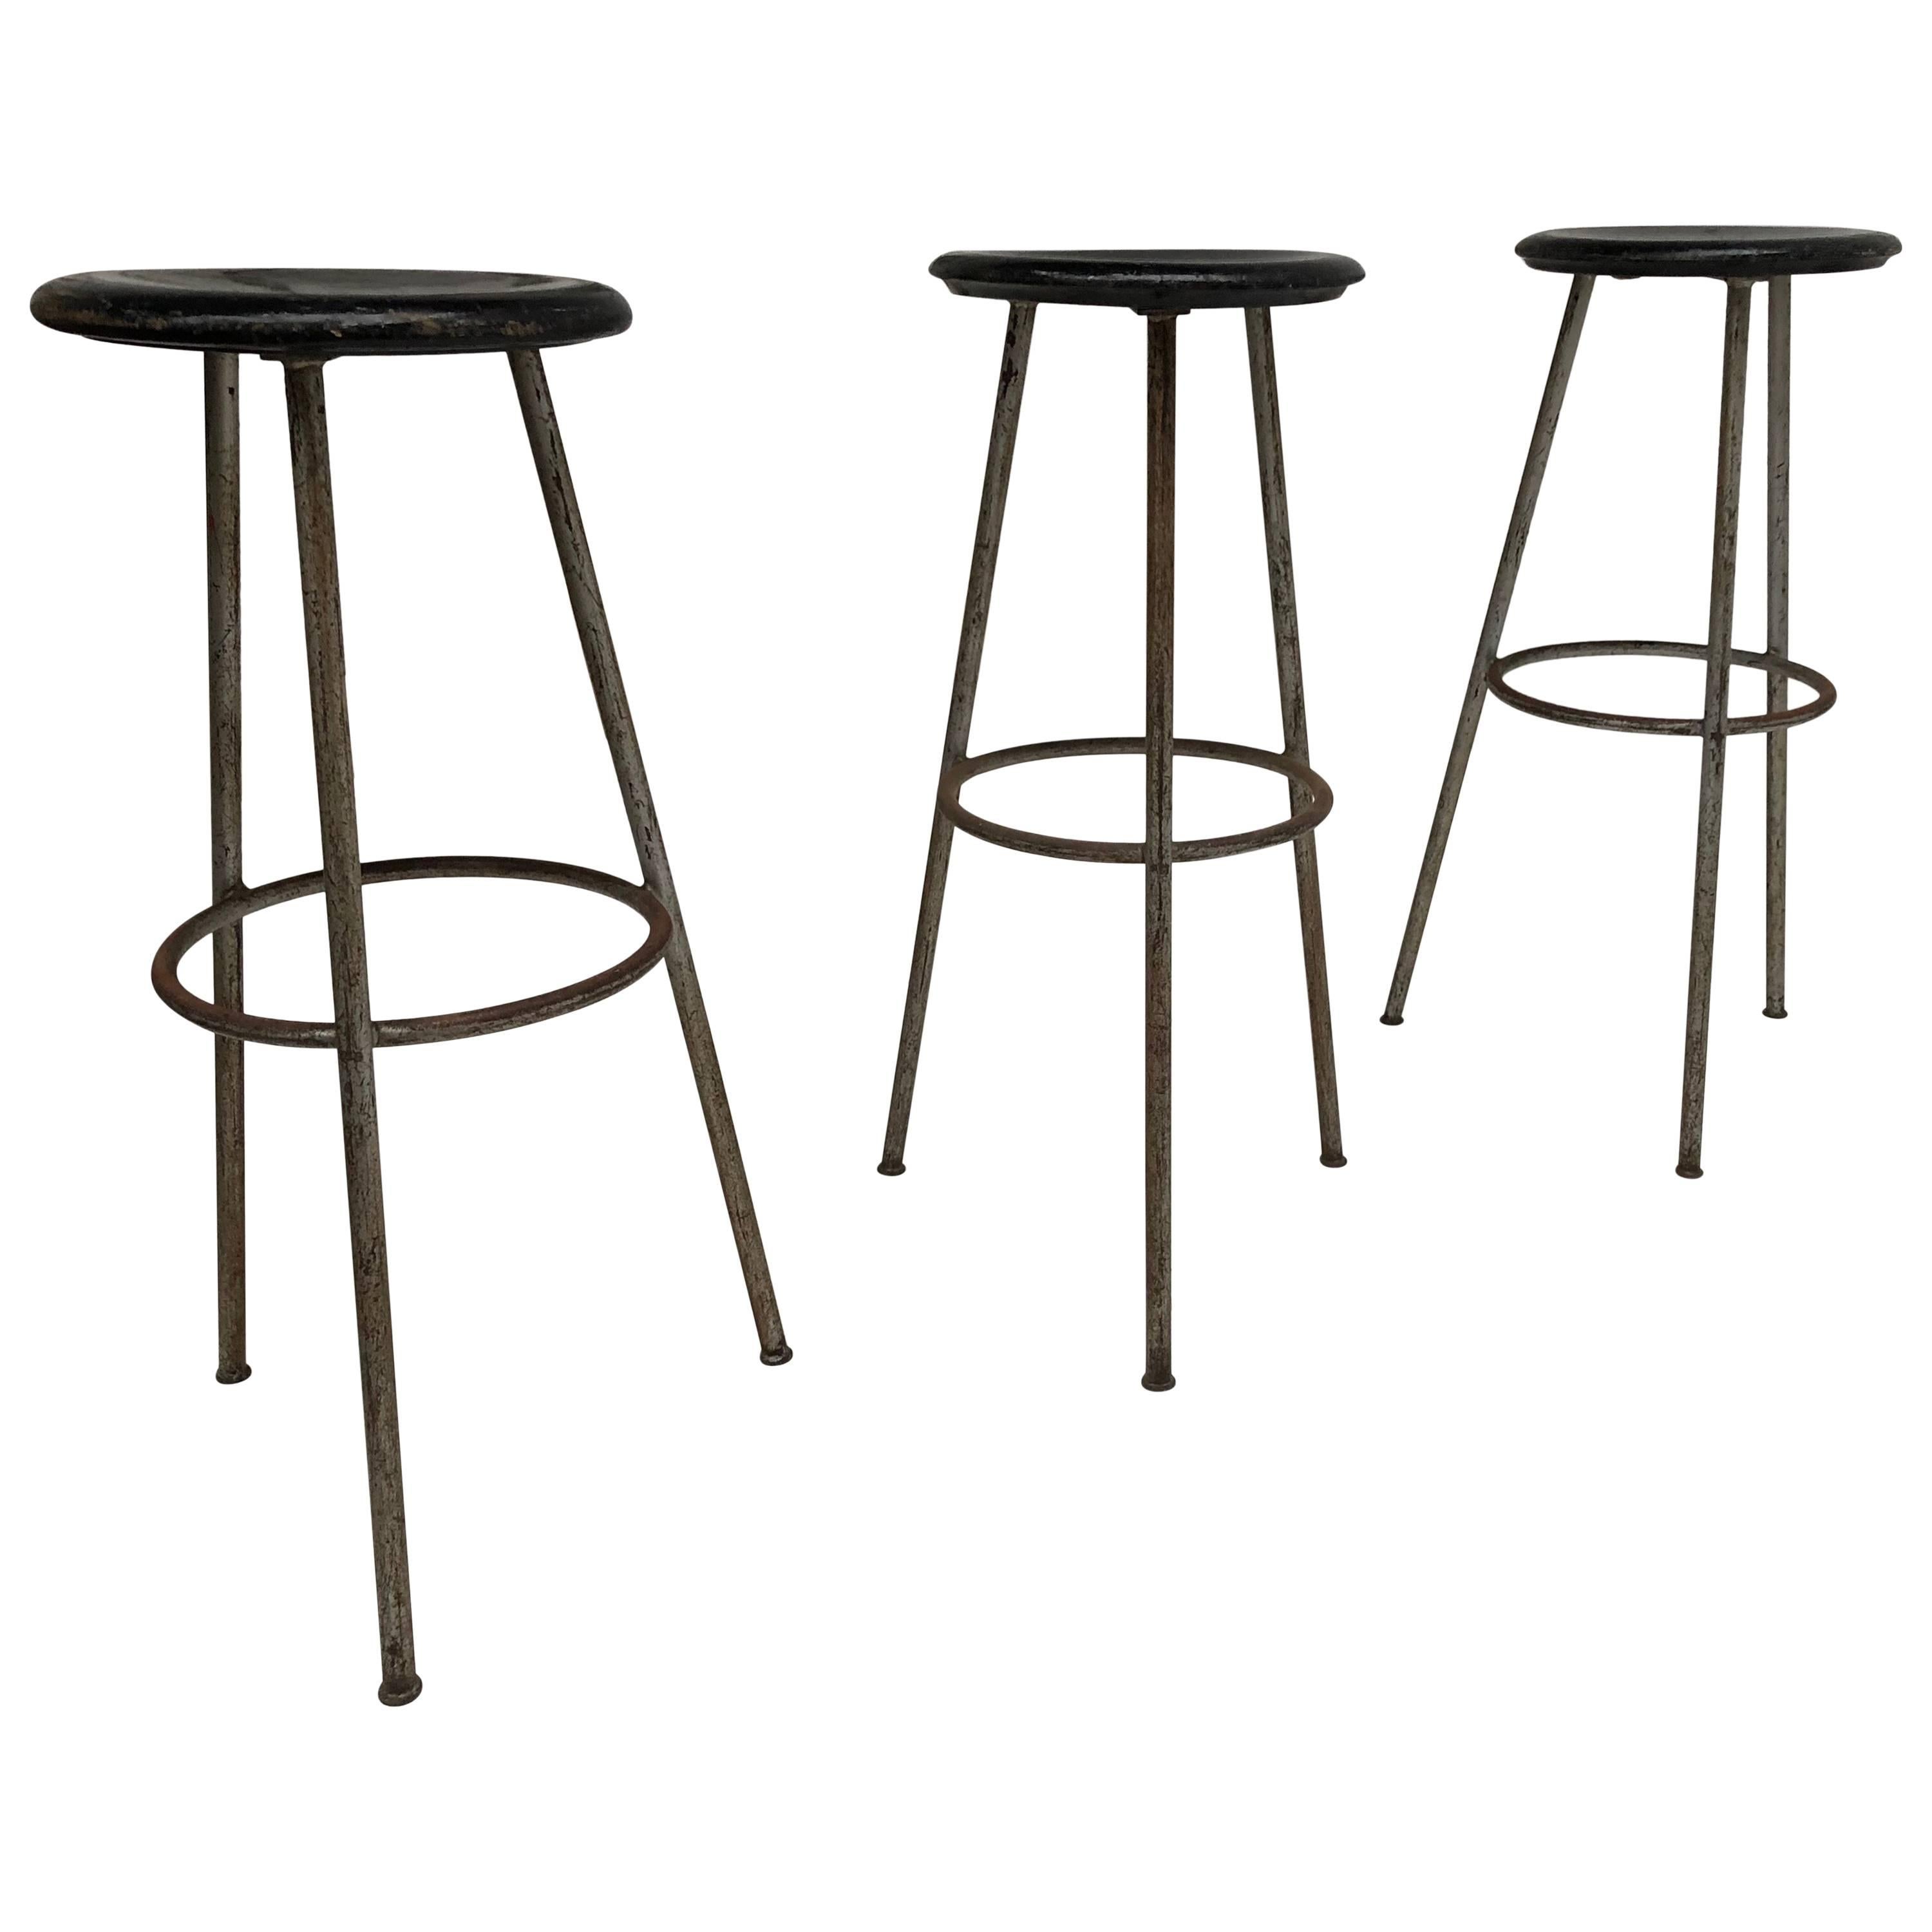 1950s Swiss Industrial Confection Atelier Tripod Working / Bar Stools